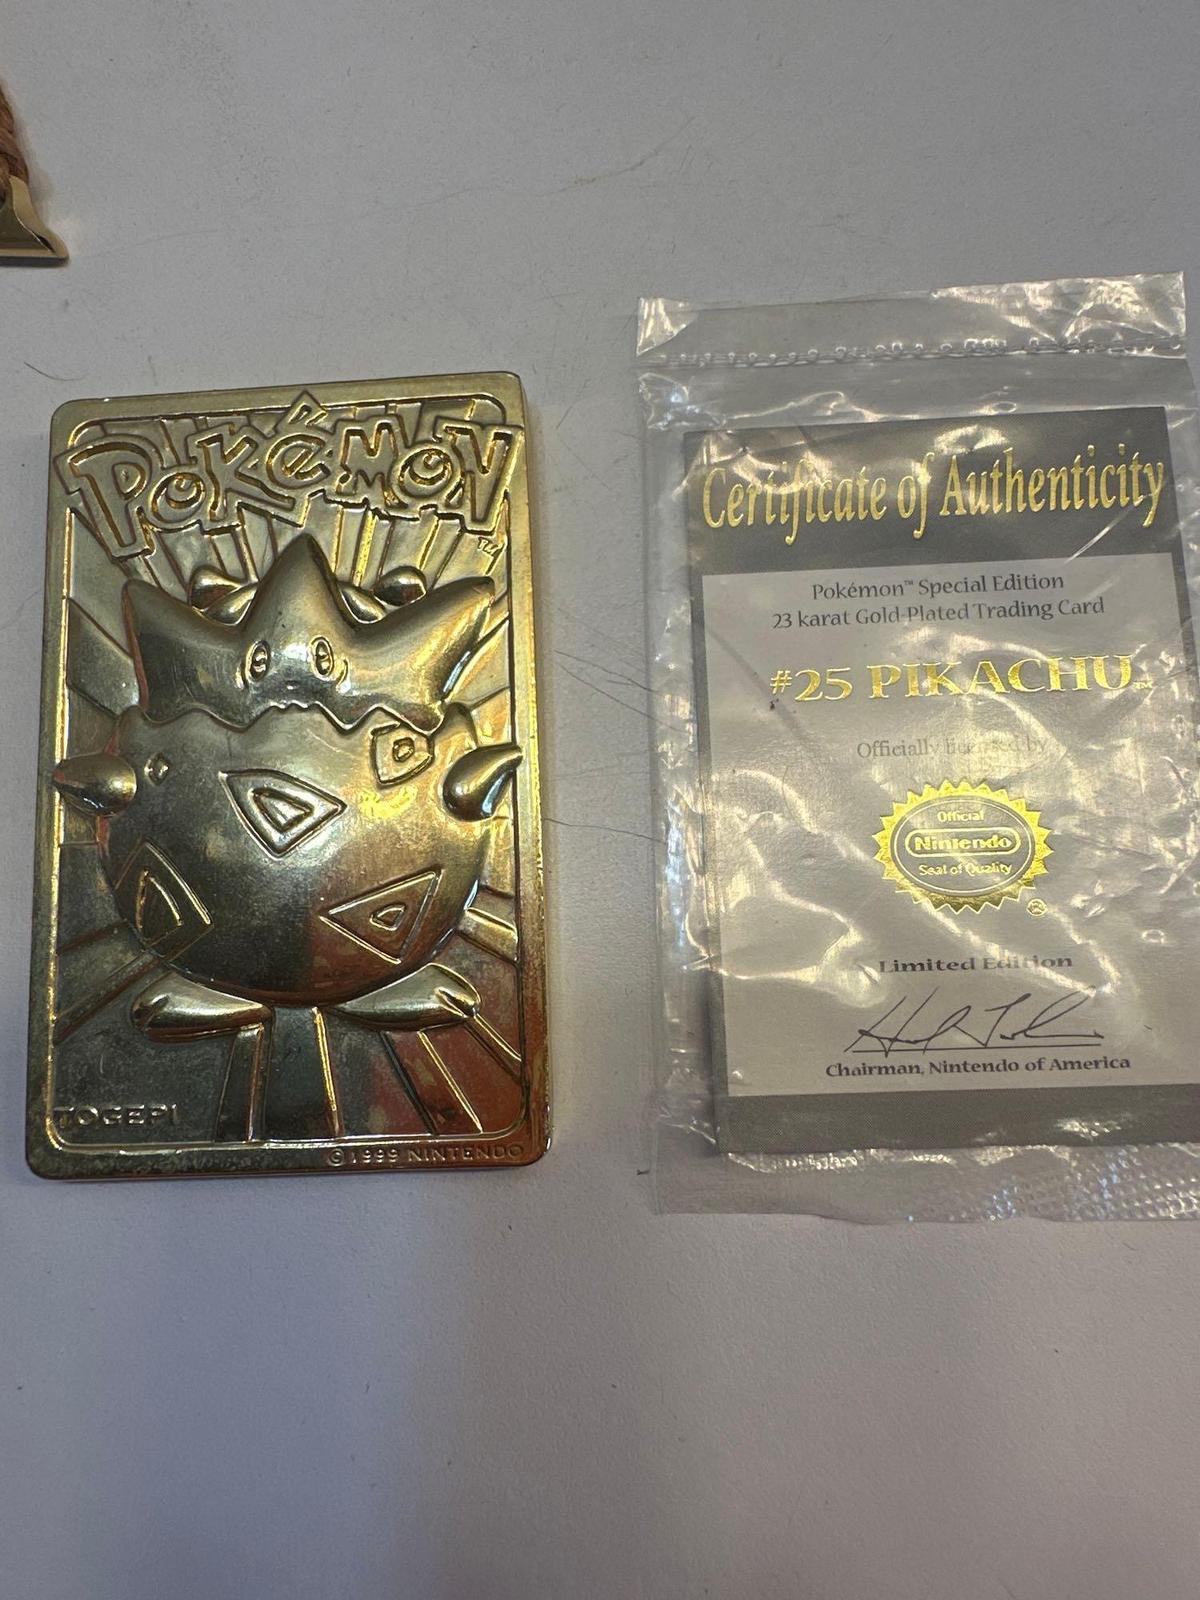 Certificate Of Authenticity 23 Karat Gold Plated Trading Card # 25 Pikachu